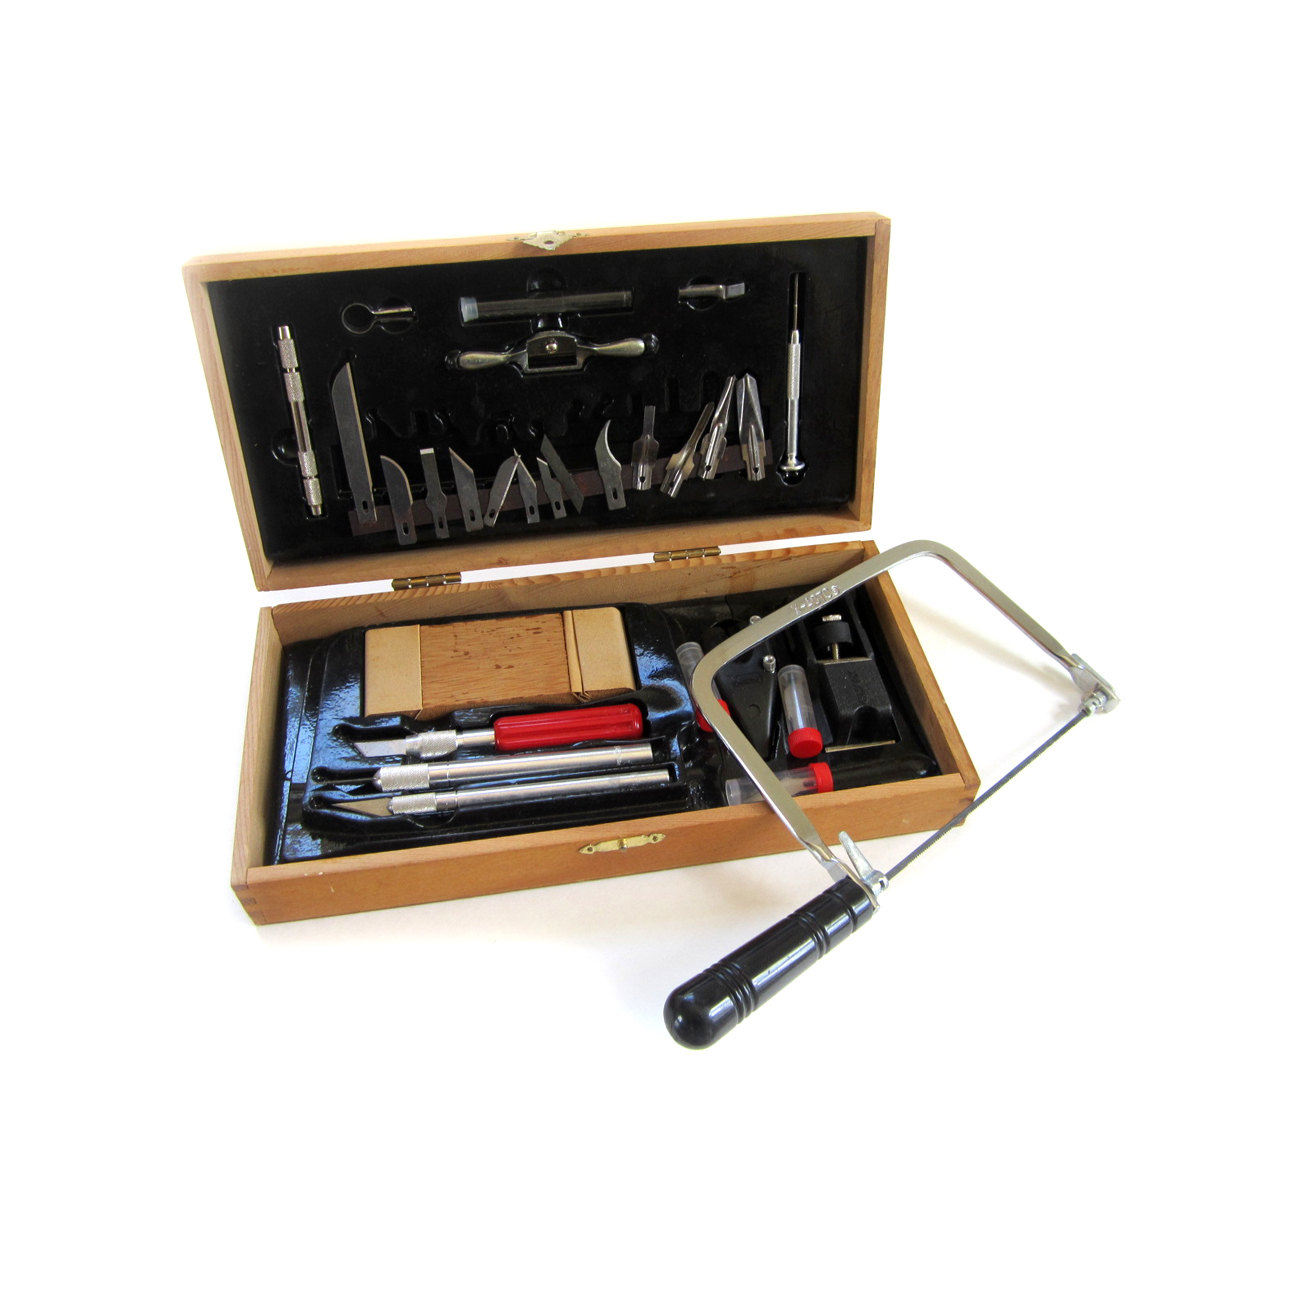 Vintage X Acto Deluxe Hobby Craft Tool Set For By Lakesidecottage